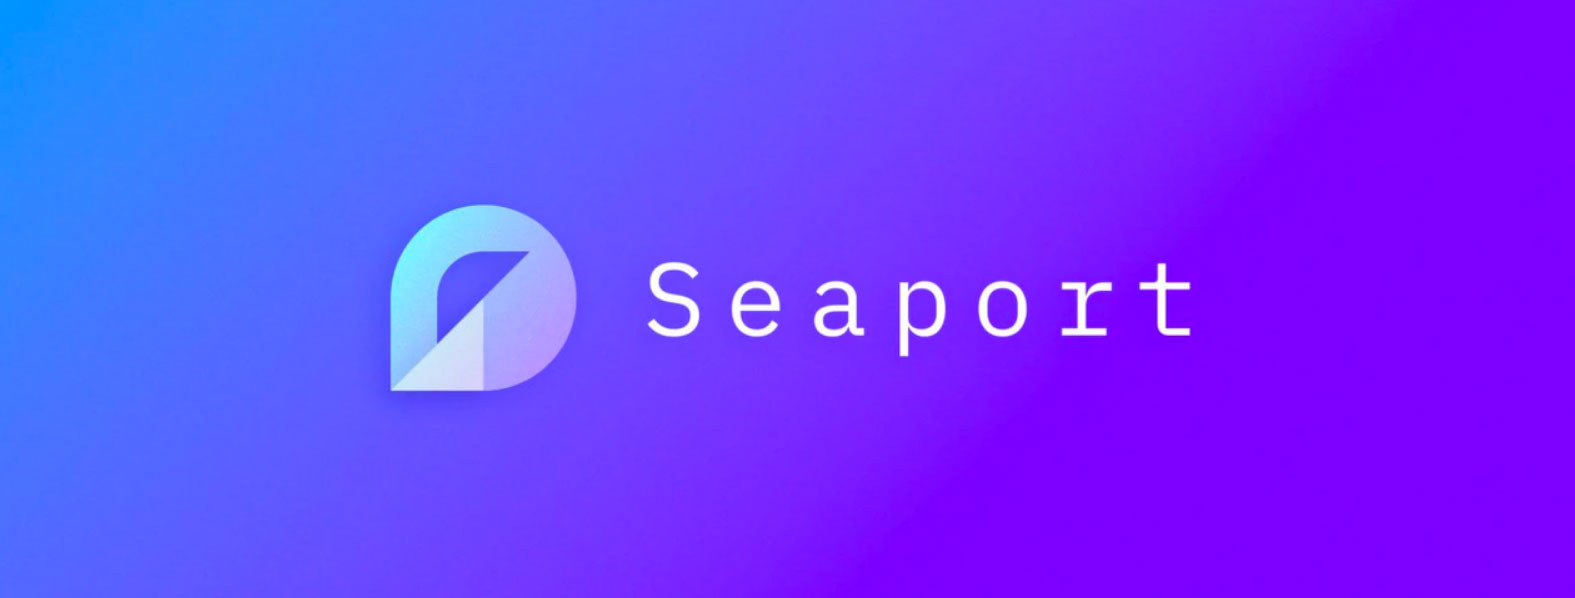 OpenSea Makes a Step Towards Decentralization with New Seaport Protocol